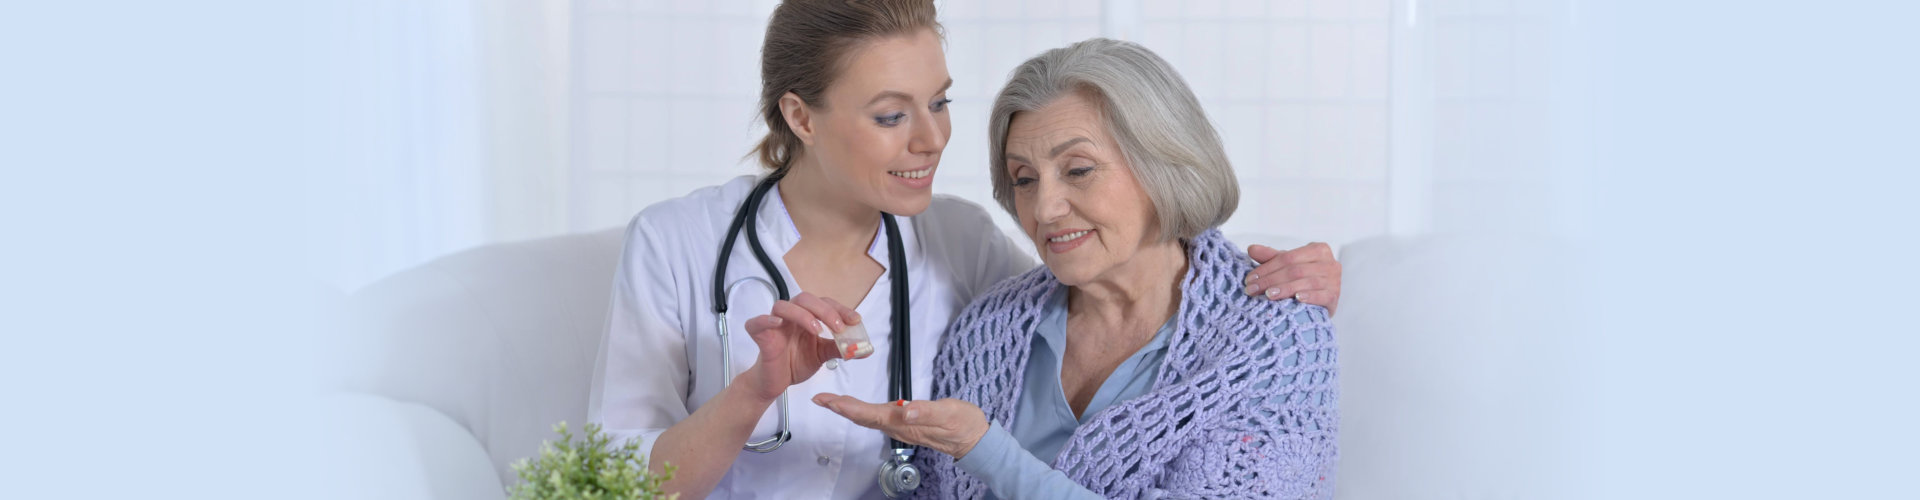 female caregiver with stethoscope giving medicine to her old woman patient